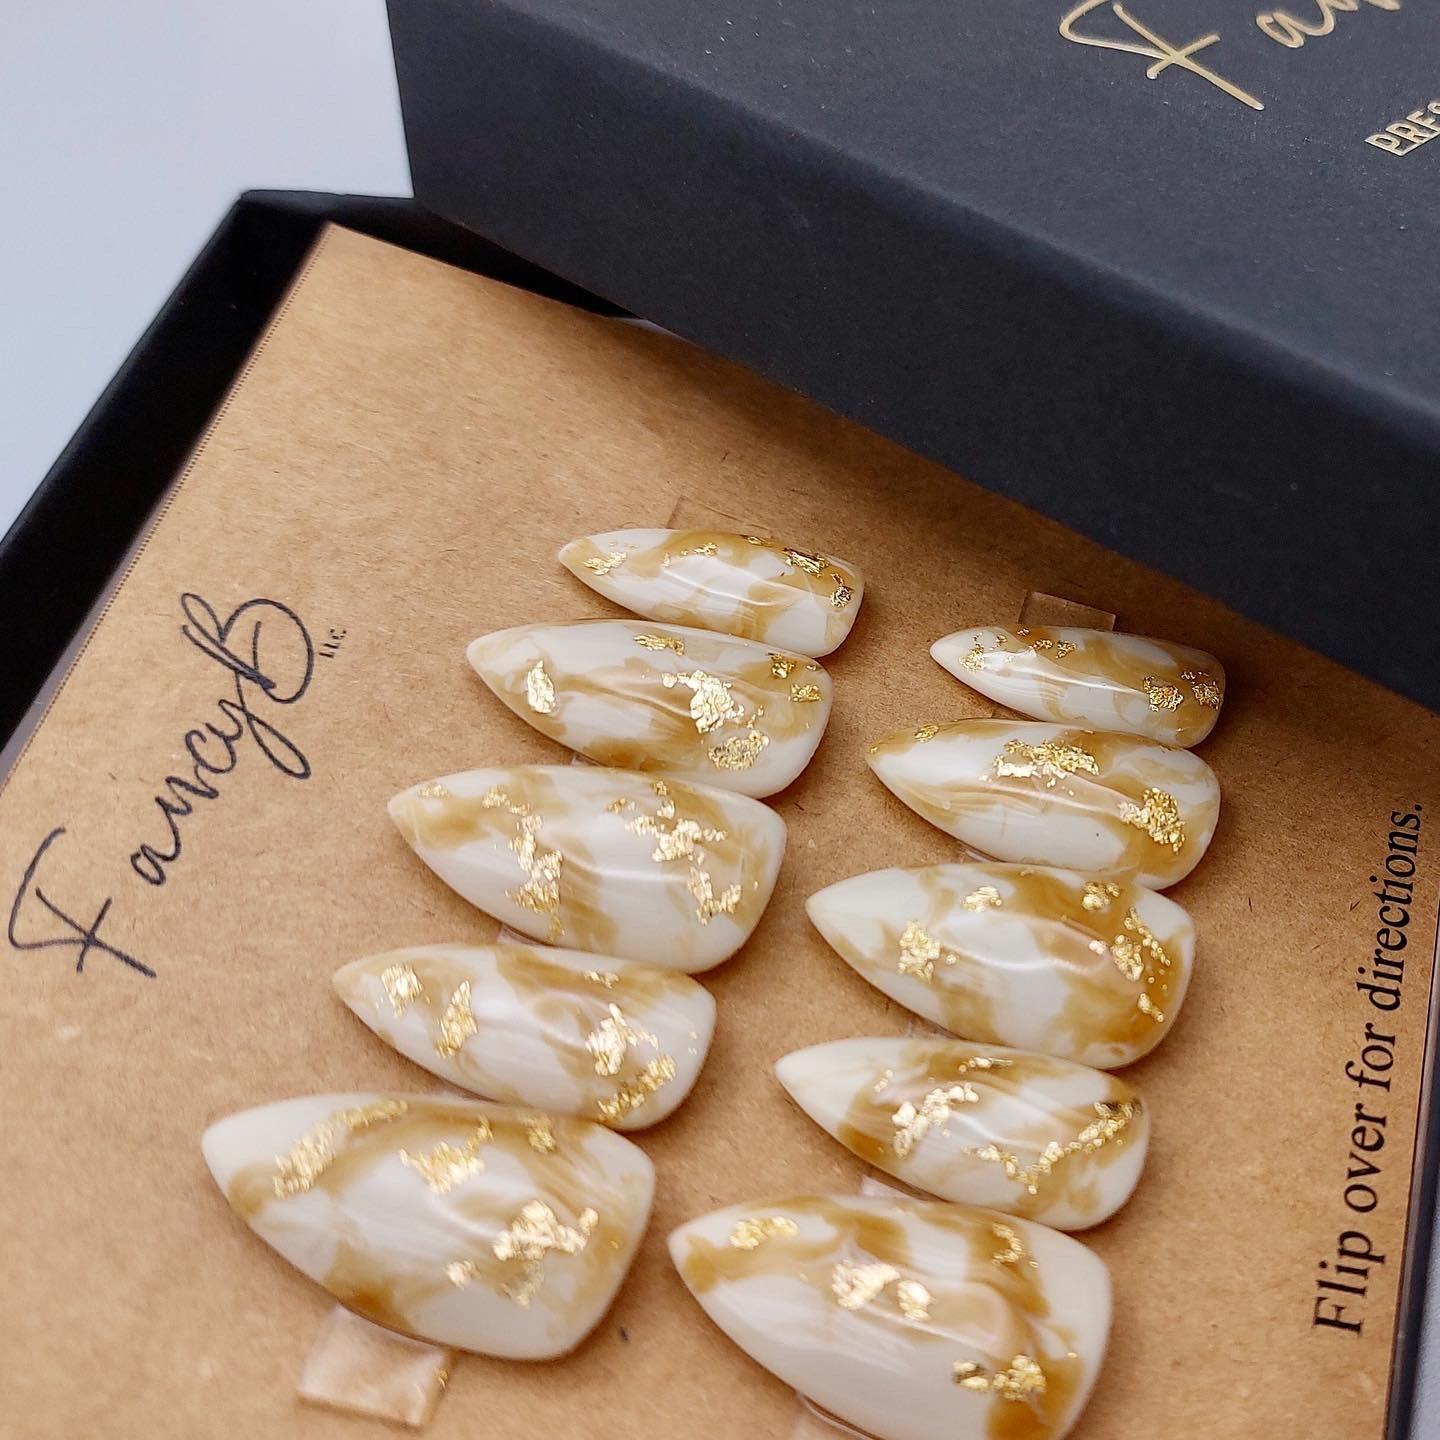 Caramel Apple | Creamy White Press on Nails with Marble and Gold Flakes - FancyB Press-on Nails